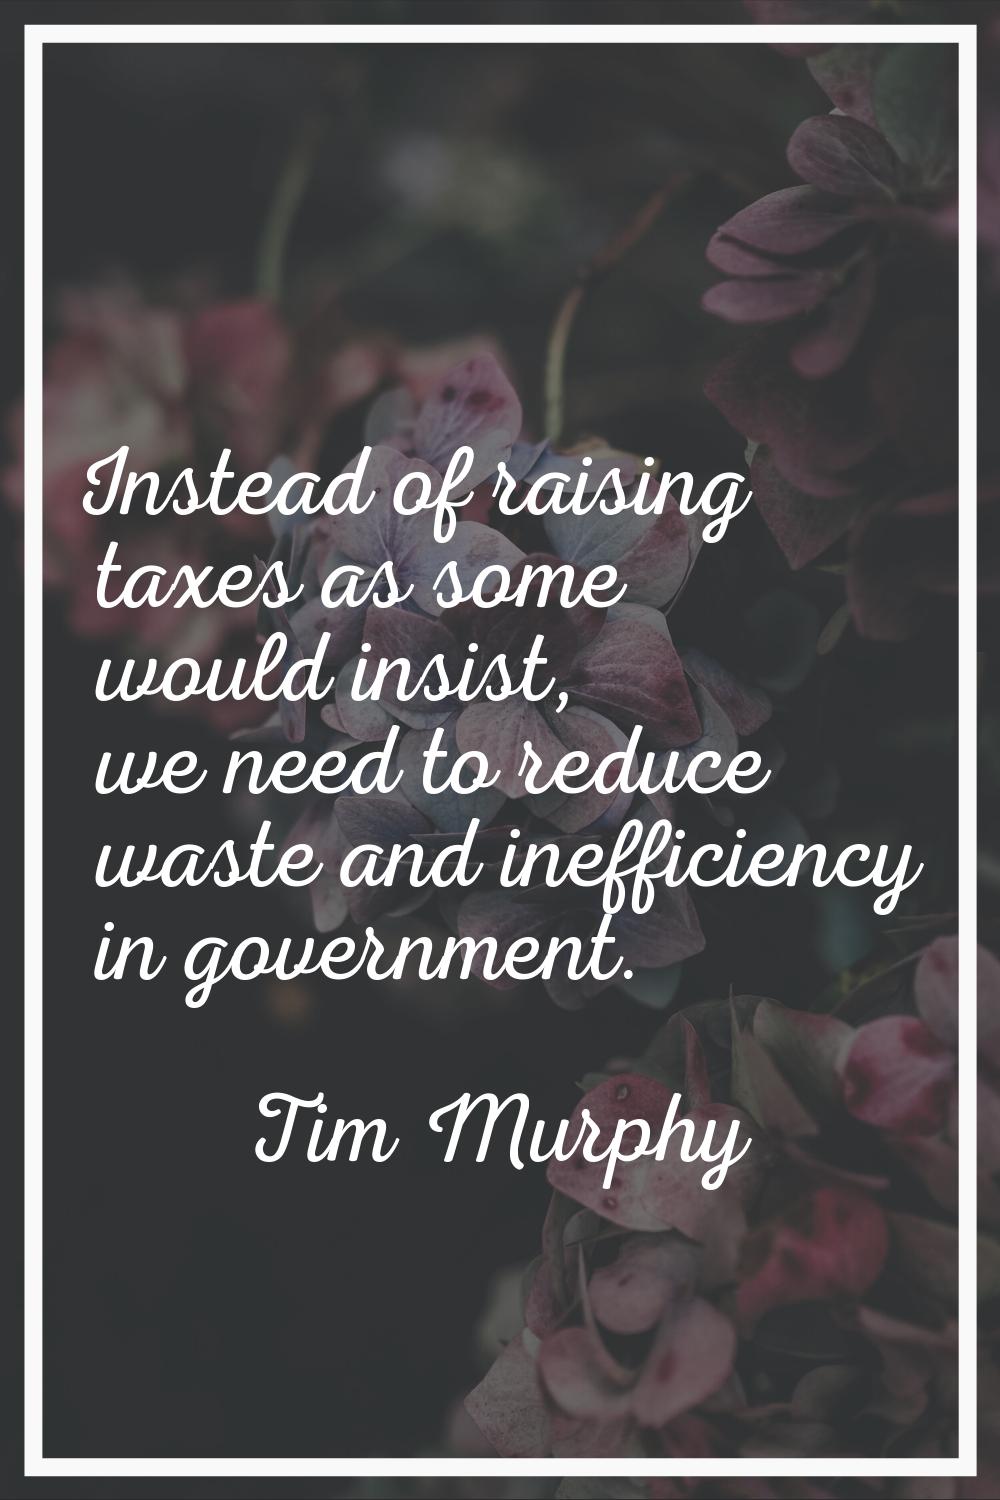 Instead of raising taxes as some would insist, we need to reduce waste and inefficiency in governme